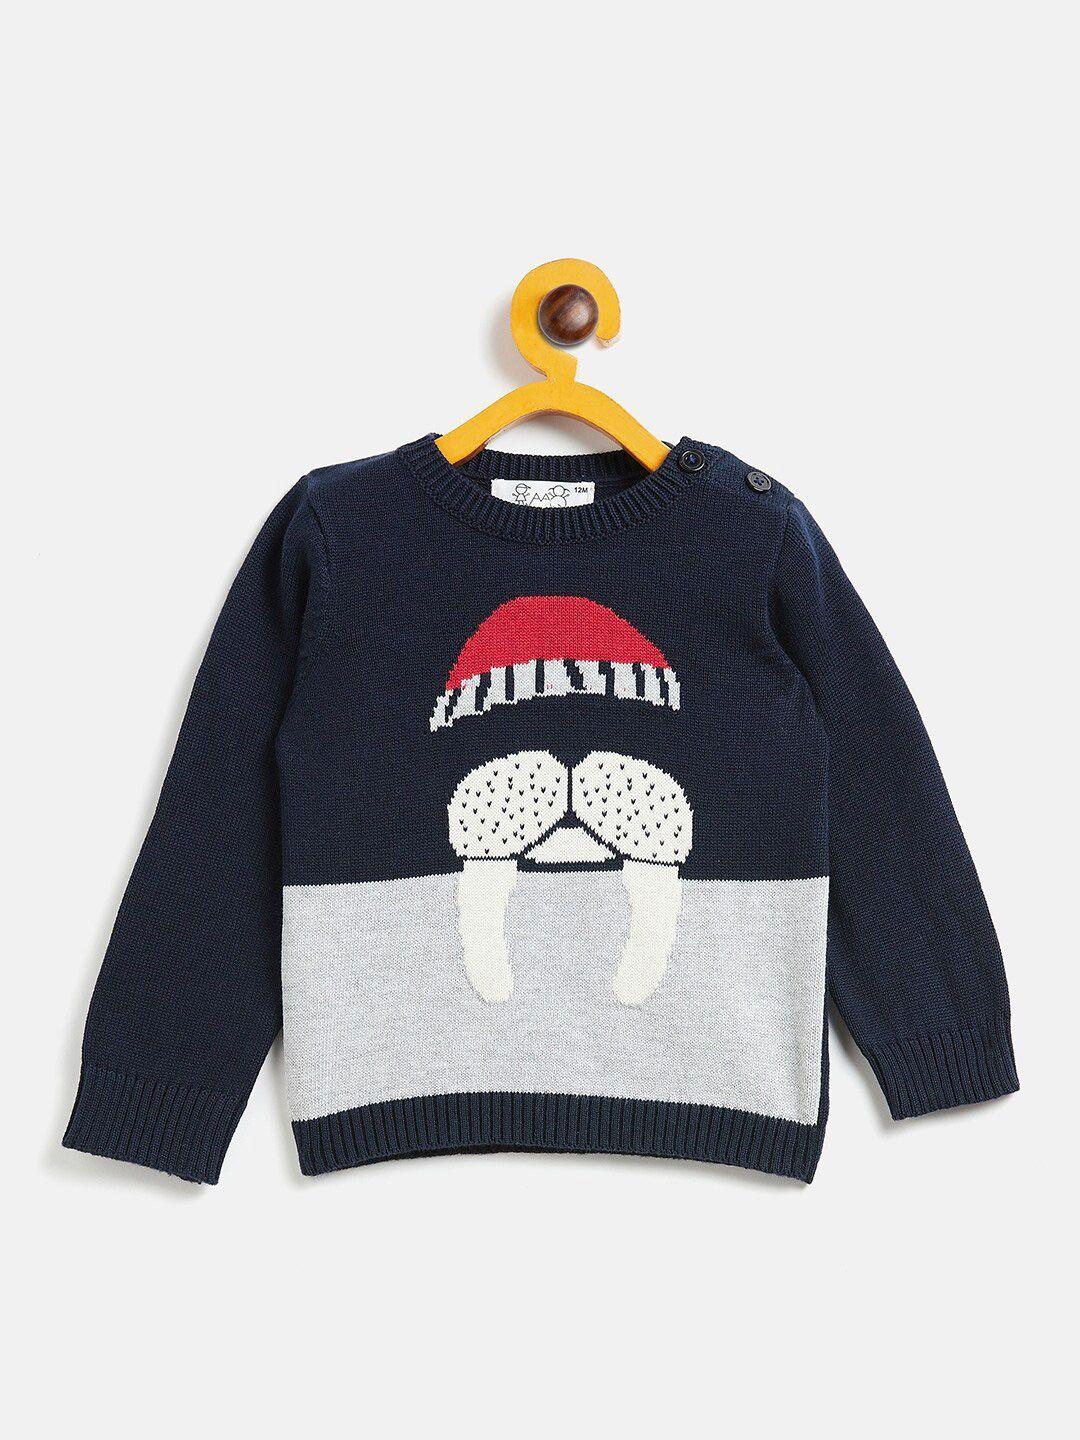 jwaaq unisex kids navy blue & white embroidered printed pullover